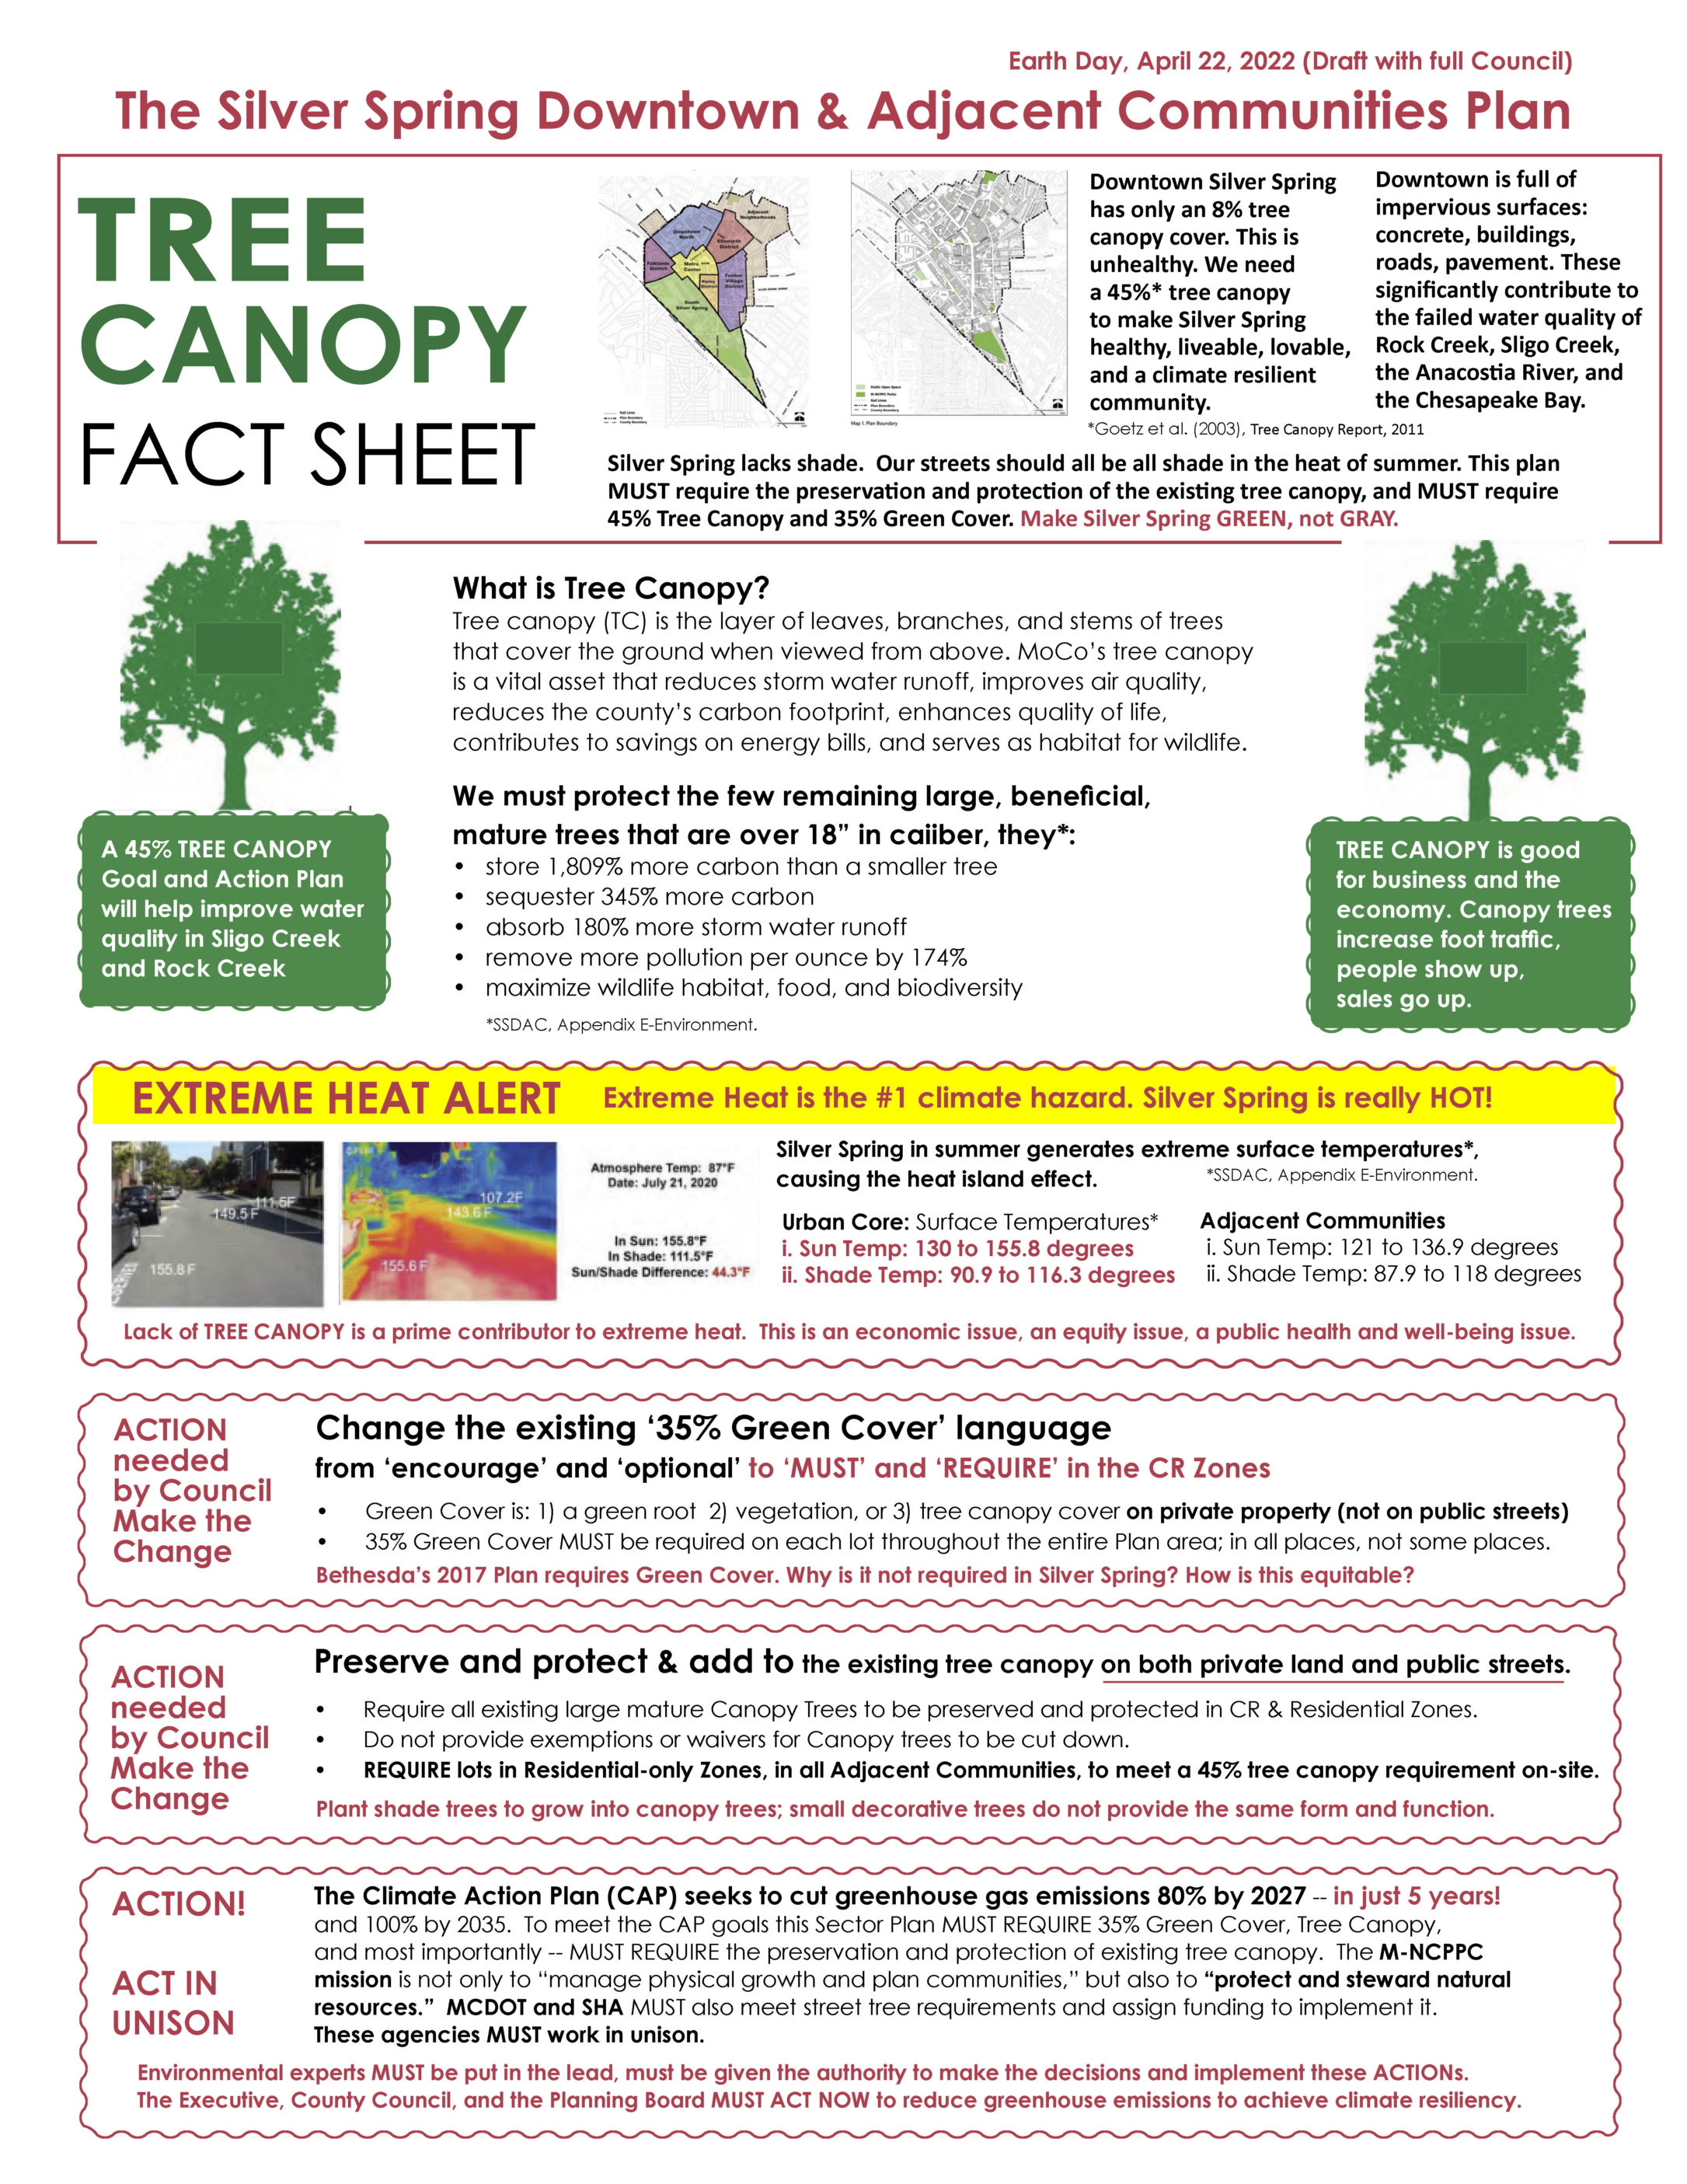 The Tree Canopy Fact Sheet prepared for the County Council hearing on the Downtown SIlver SPring and Adjacent Communities Master Plan , April 2022